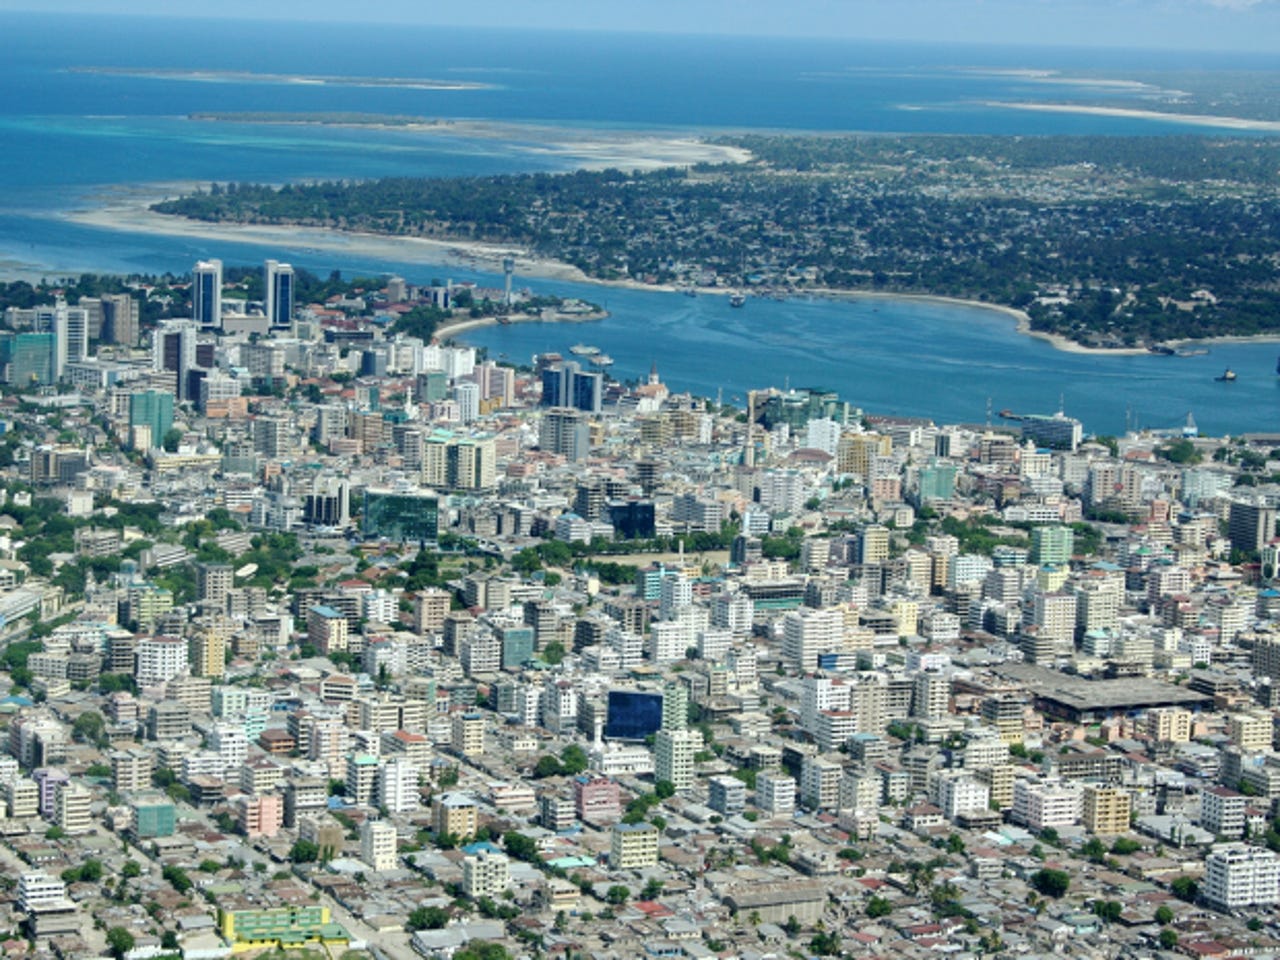 Dar es Salaam, the site of Microsoft's next white space broadband project.